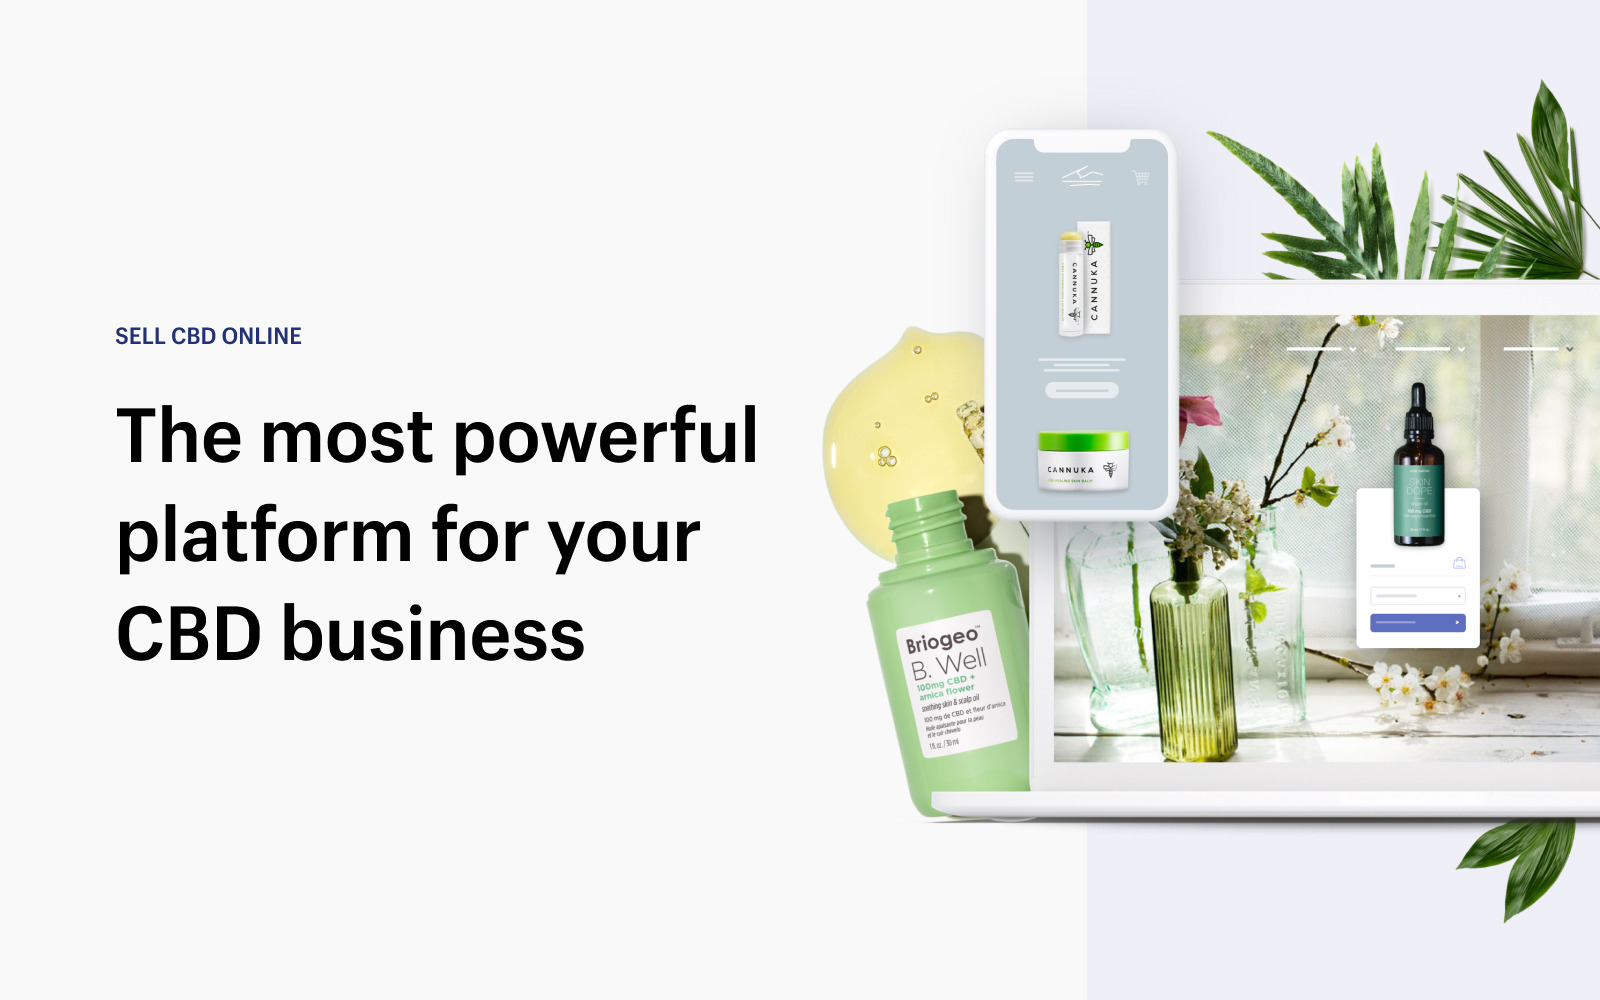 CBD Businesses Are Booming: Here's How to Get in on CBD